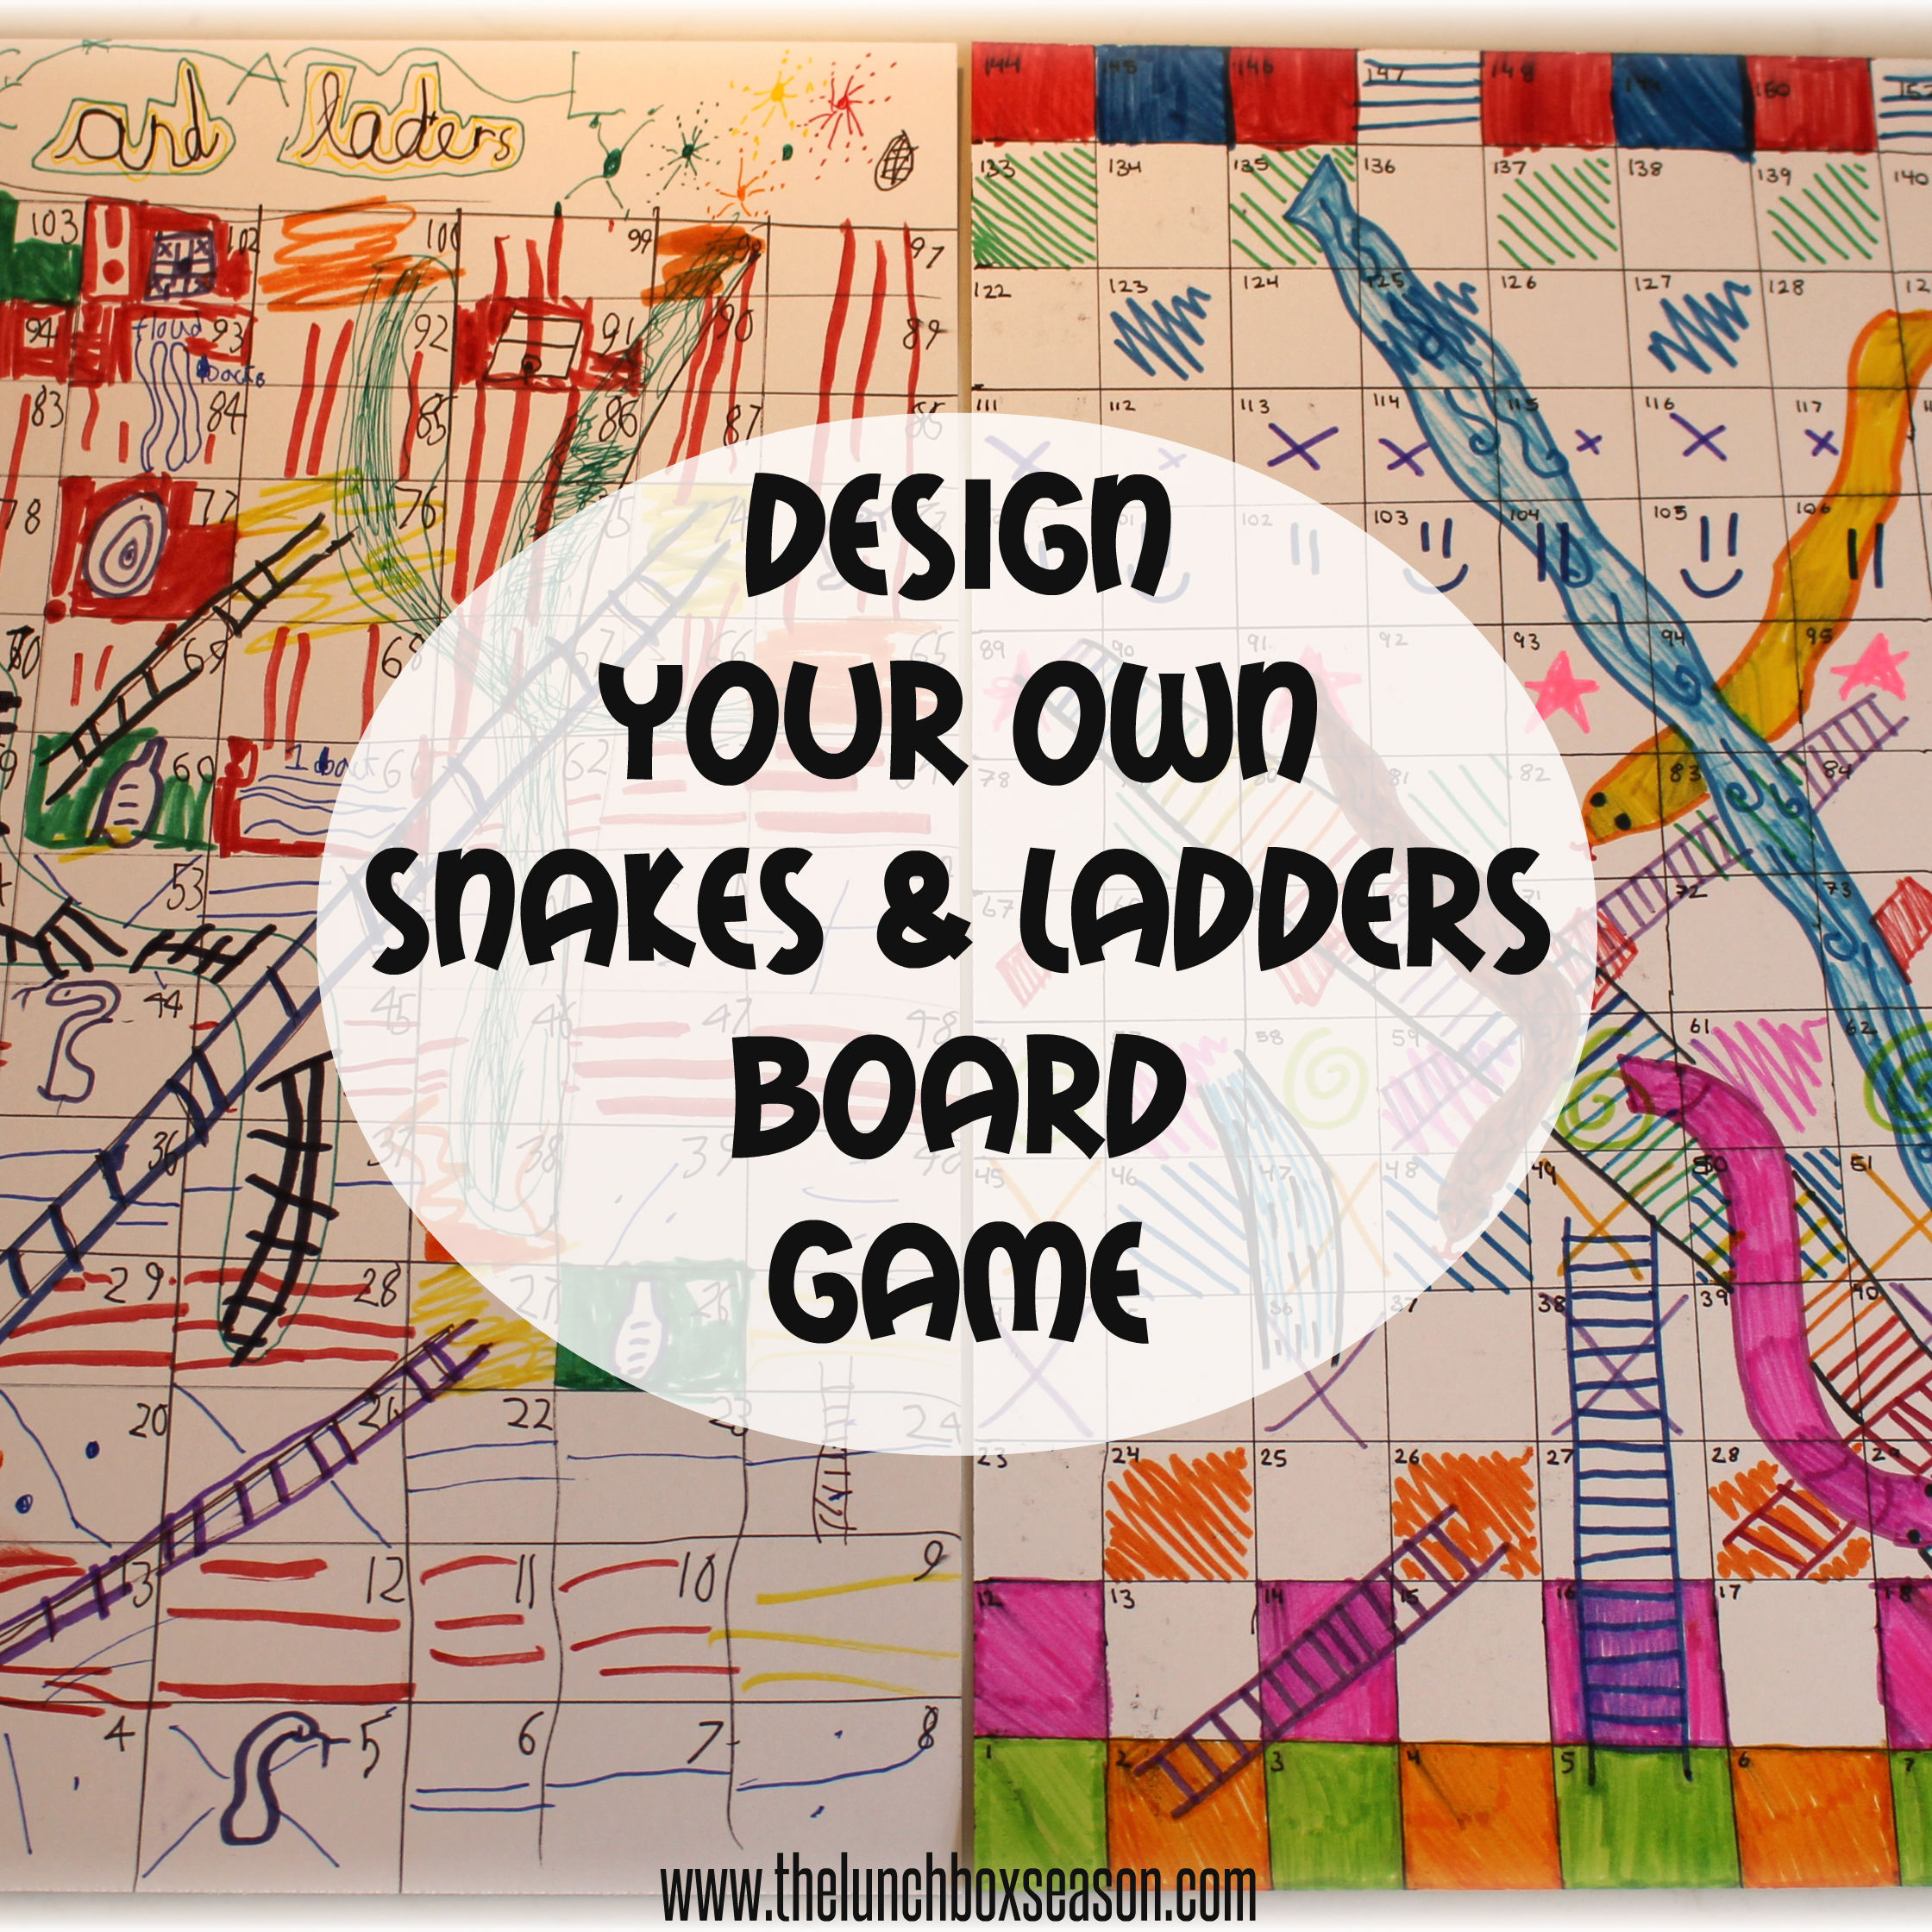 March Break Ideas Design Your Own Snakes and Ladders [Chutes and ladders] Board Game